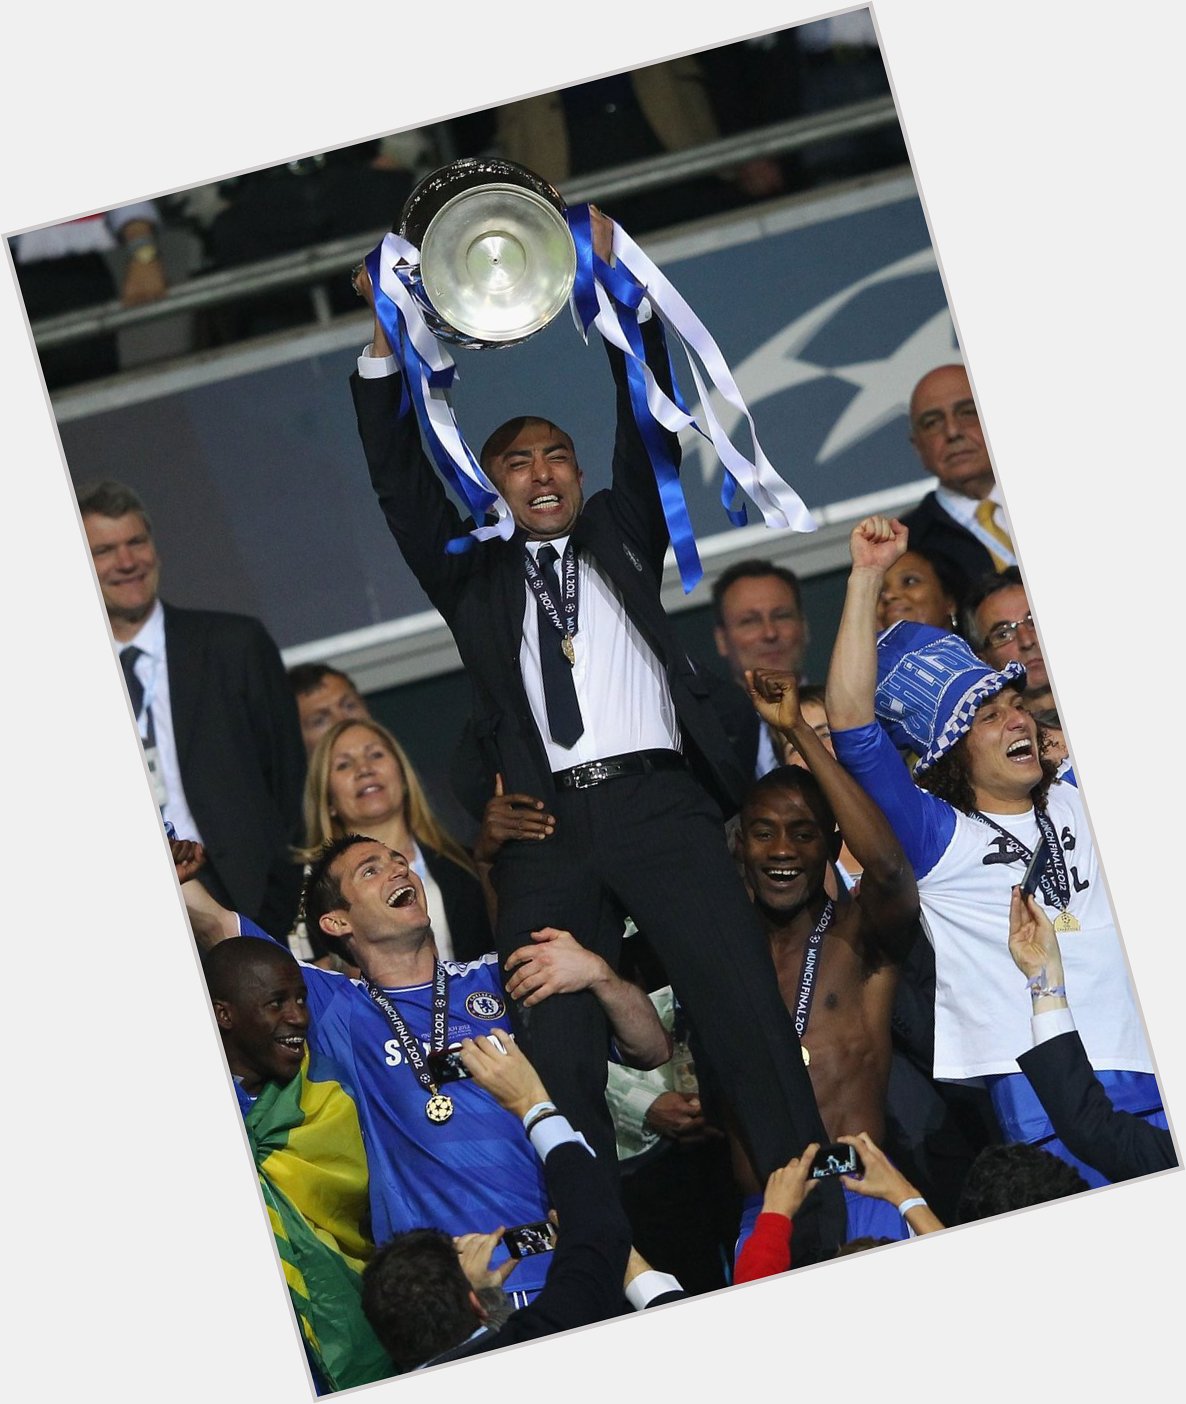  Happy birthday to Roberto Di Matteo! 

Took us from a dream, to achieving the impossible!   